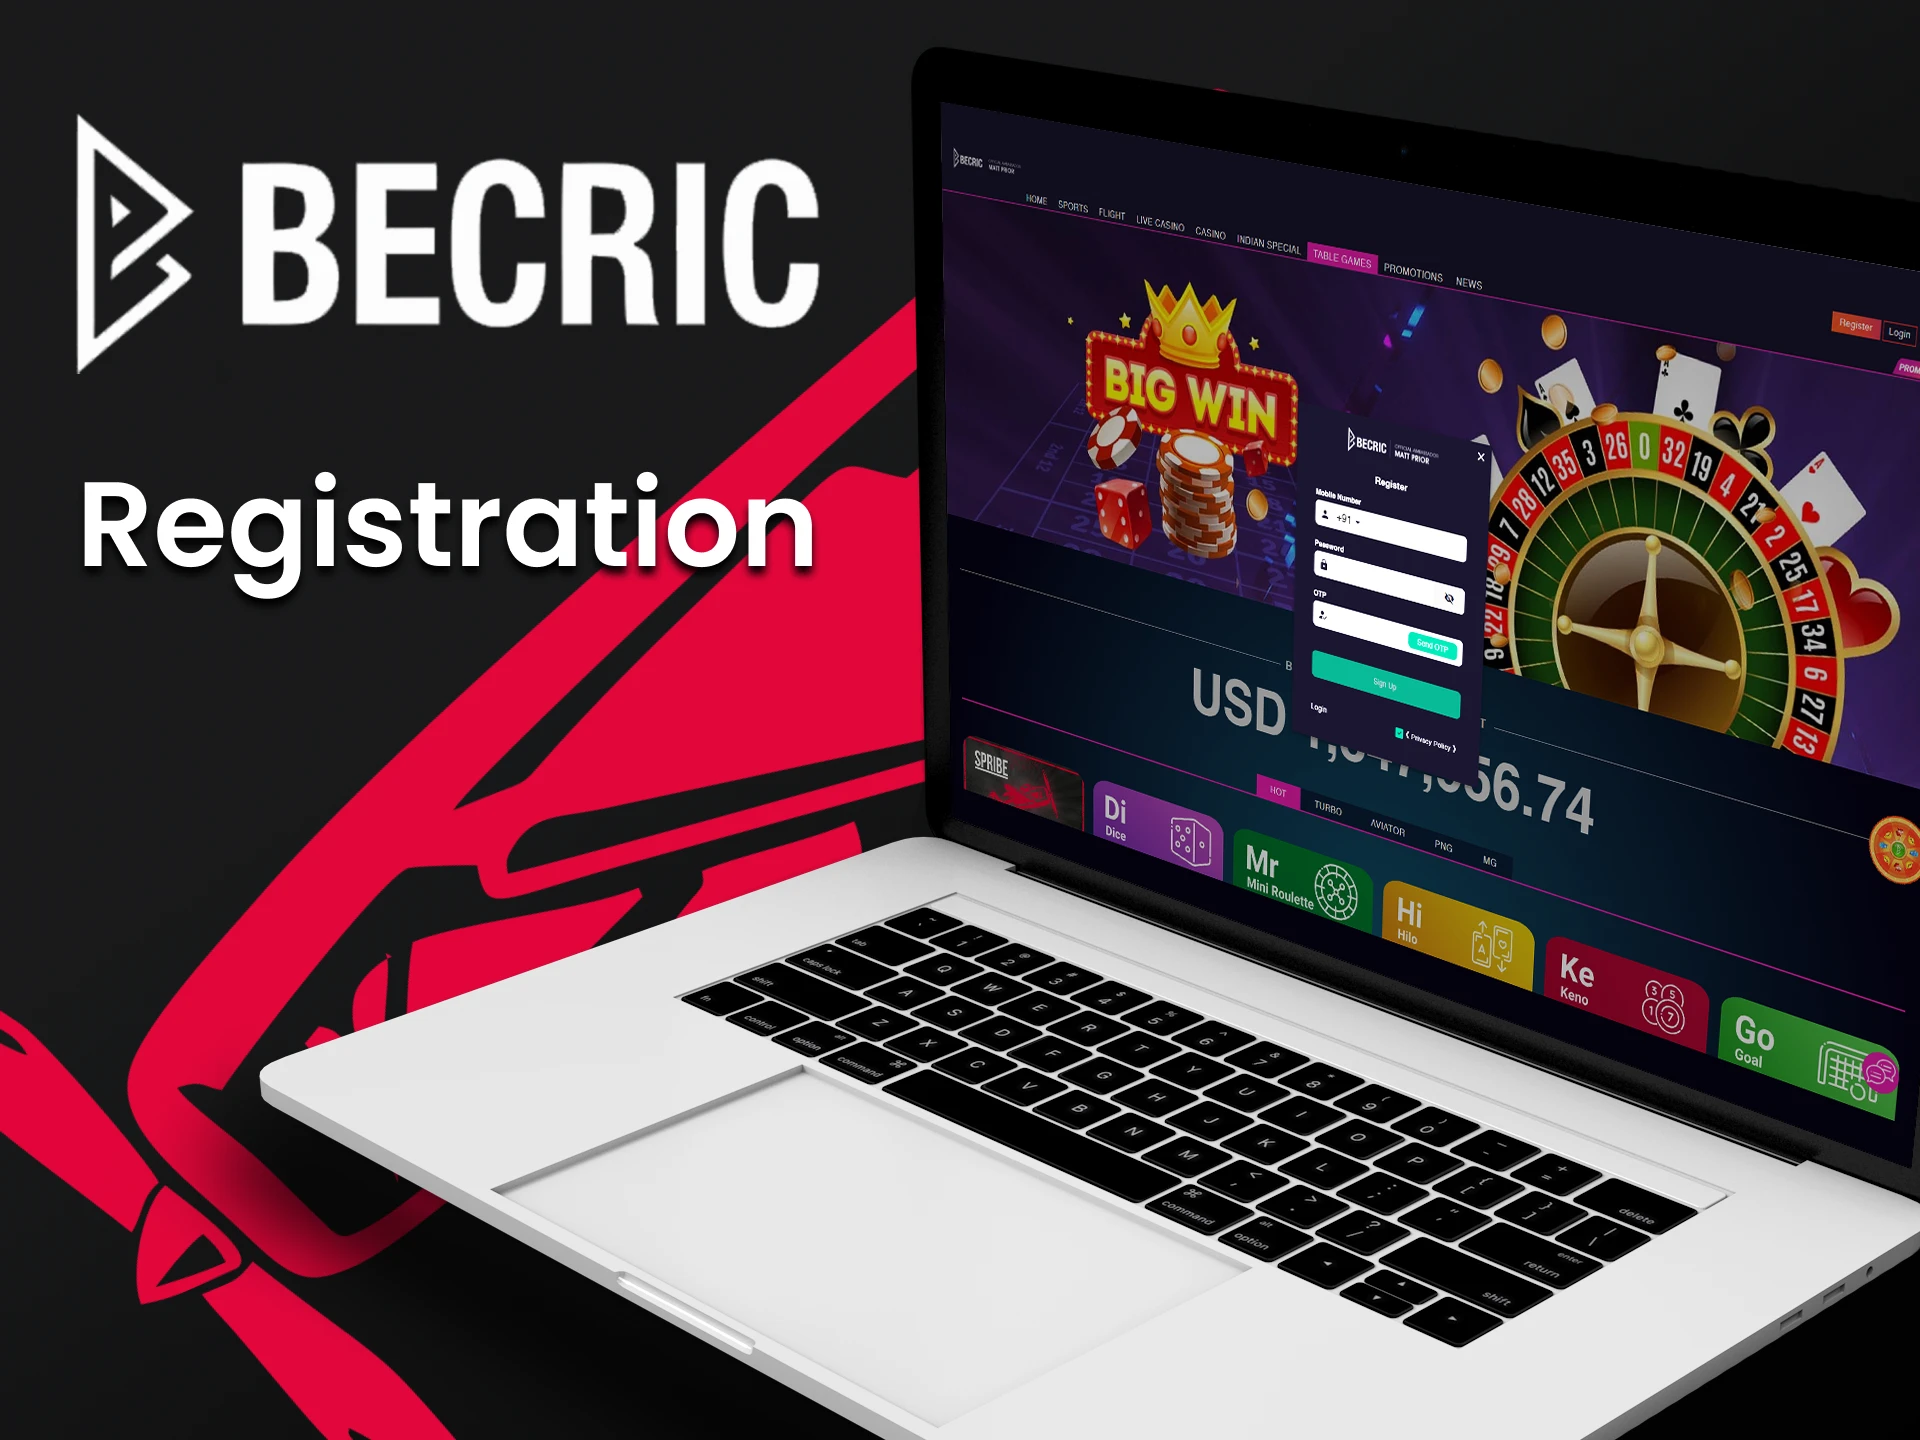 To start playing Aviator on Becric, you need to create an account.